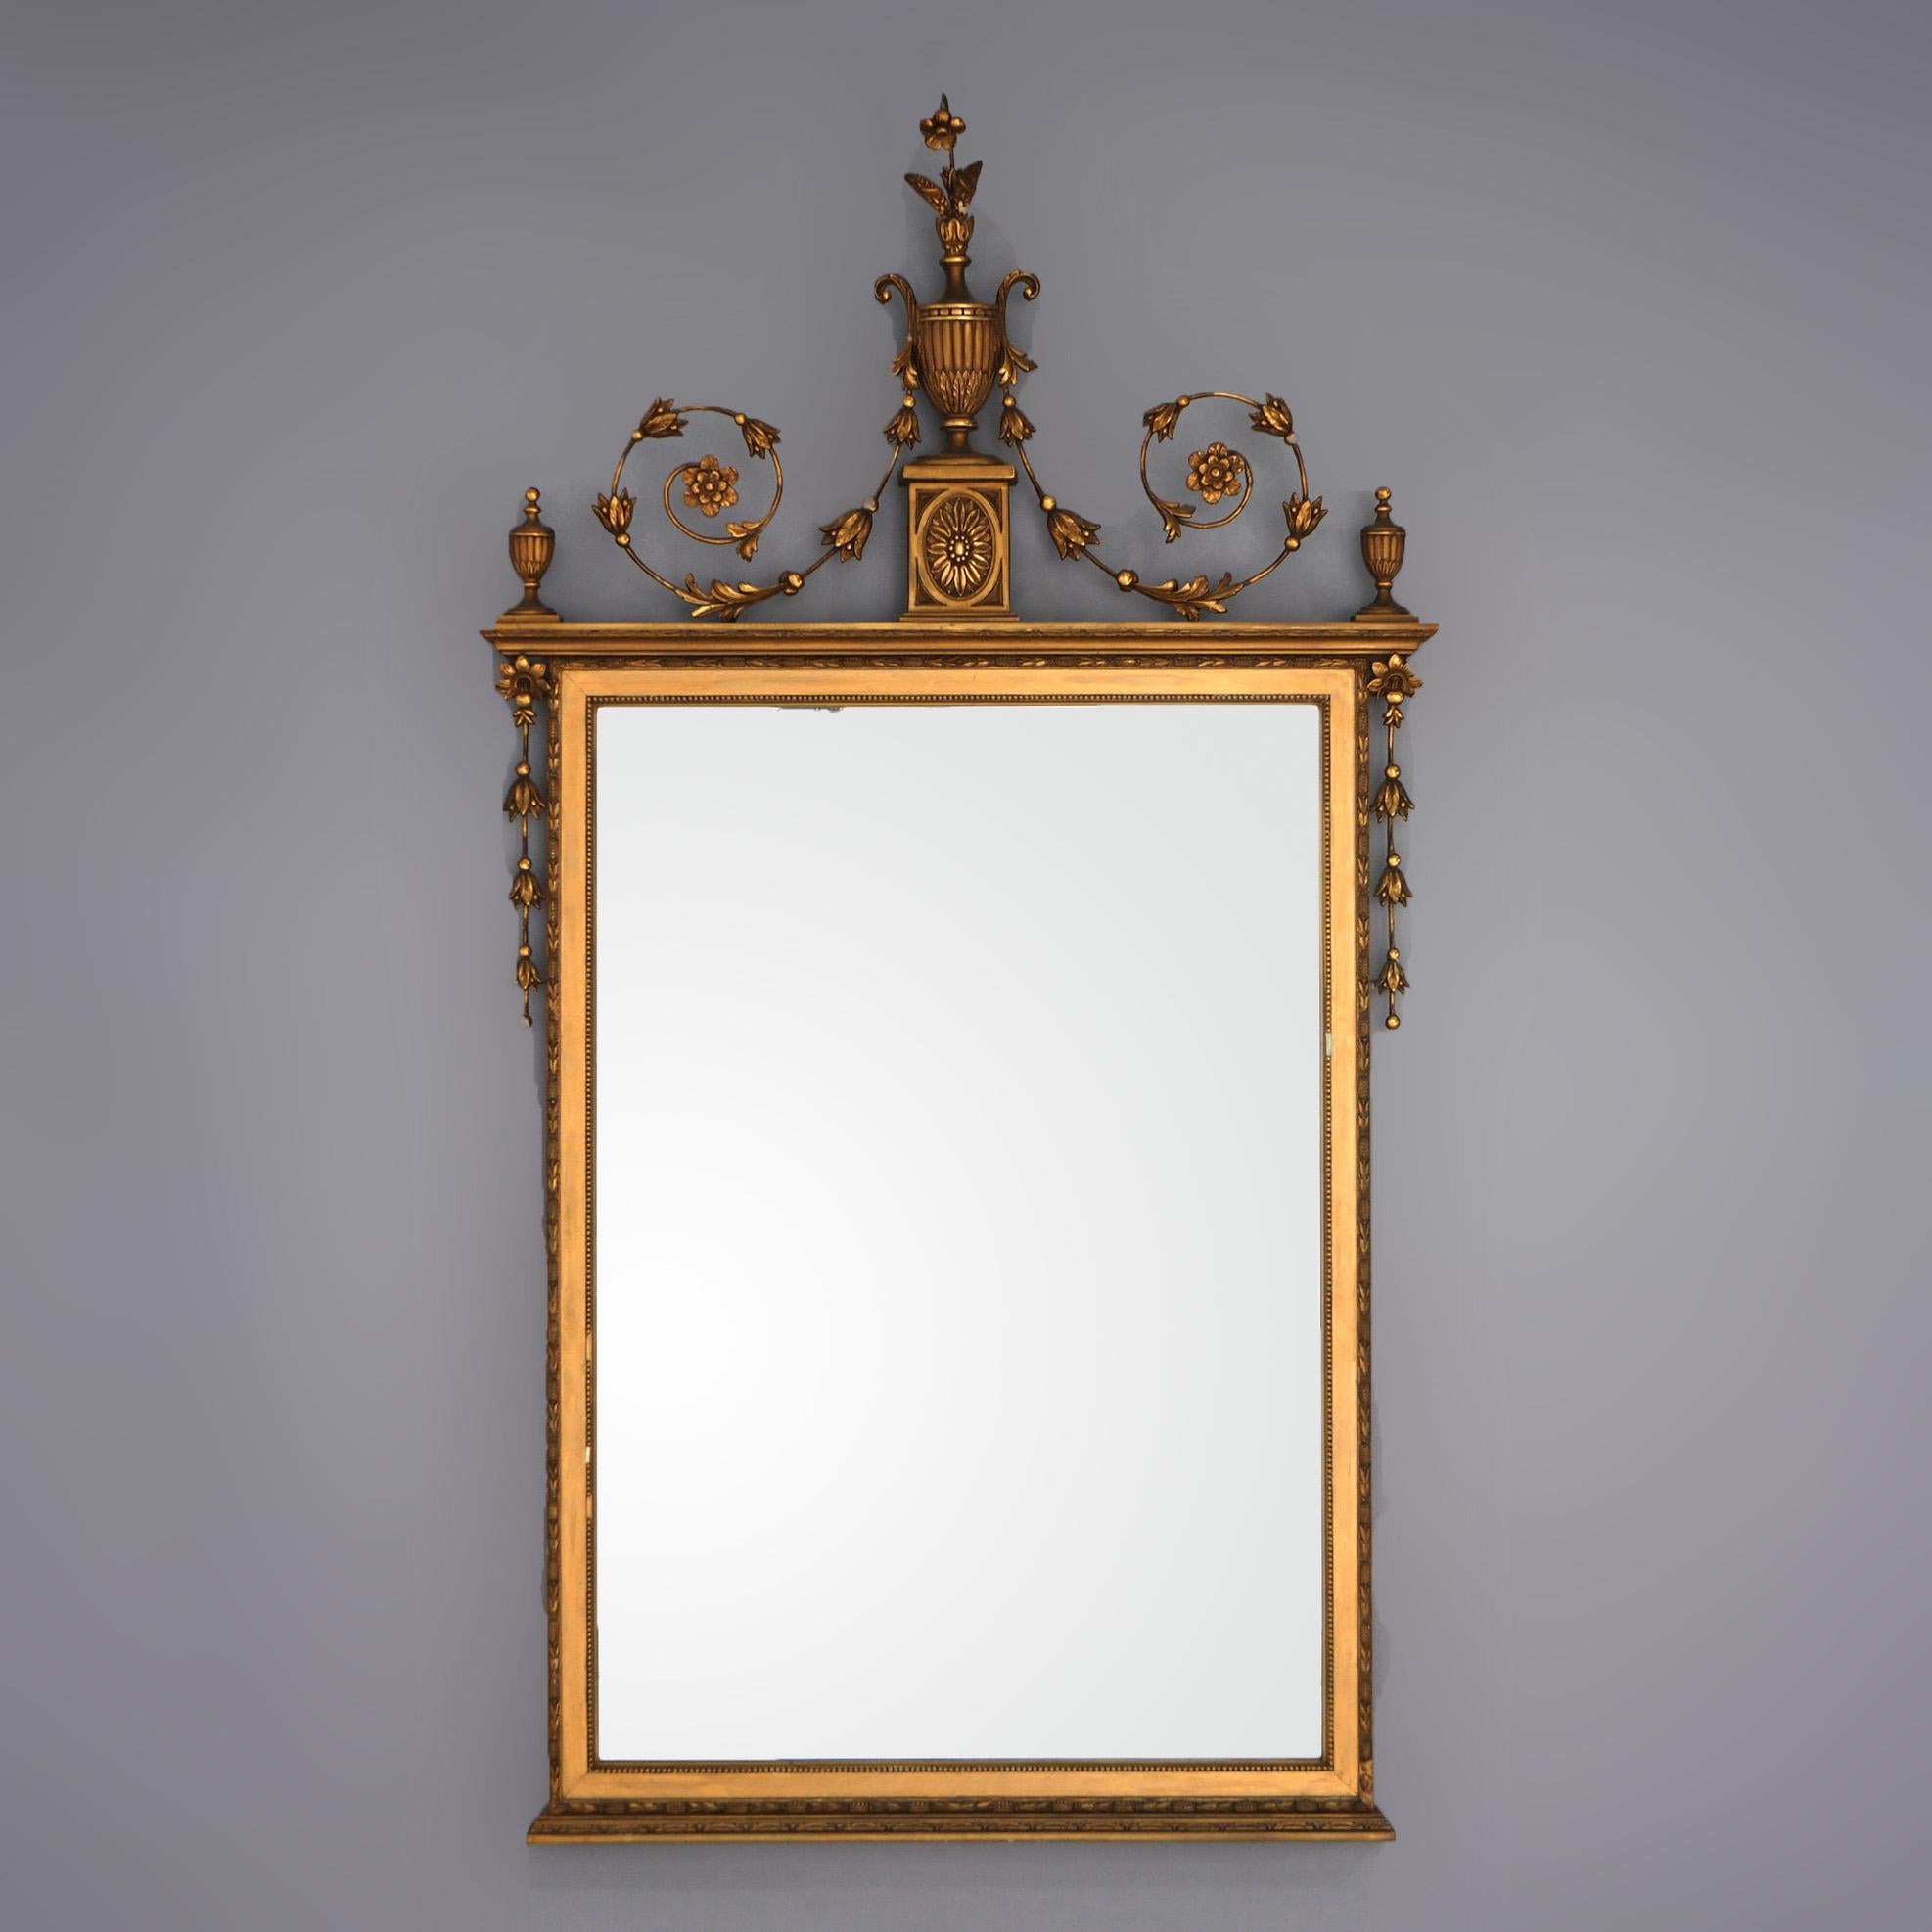 An antique French Empire style wall mirror offers giltwood frame with Grecian urn, bellflowers and foliate elements, c1900
 
Measures - 52.25